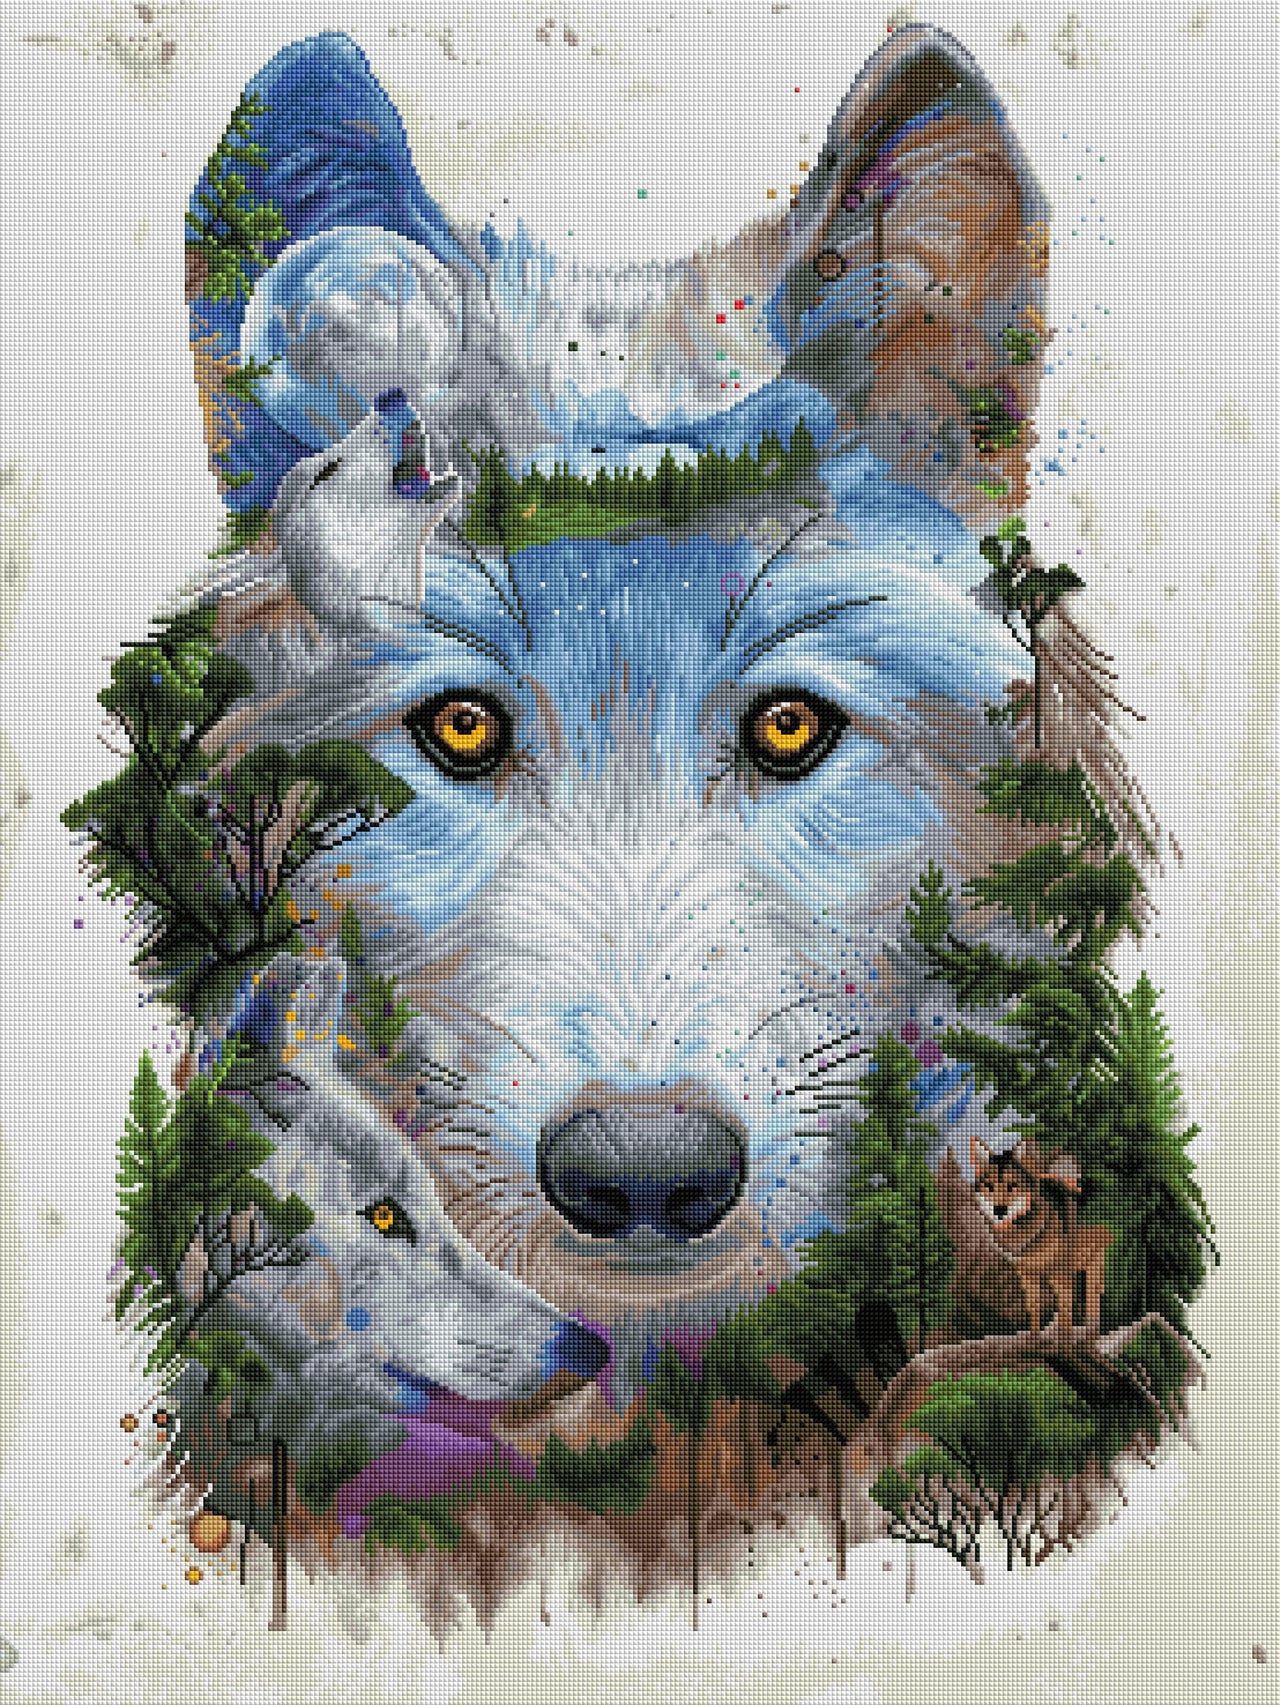 Diamond Painting Wolf Pack 27.6" x 36.6" (70cm x 93cm) / Square With 56 Colors Including 4 ABs / 102,213